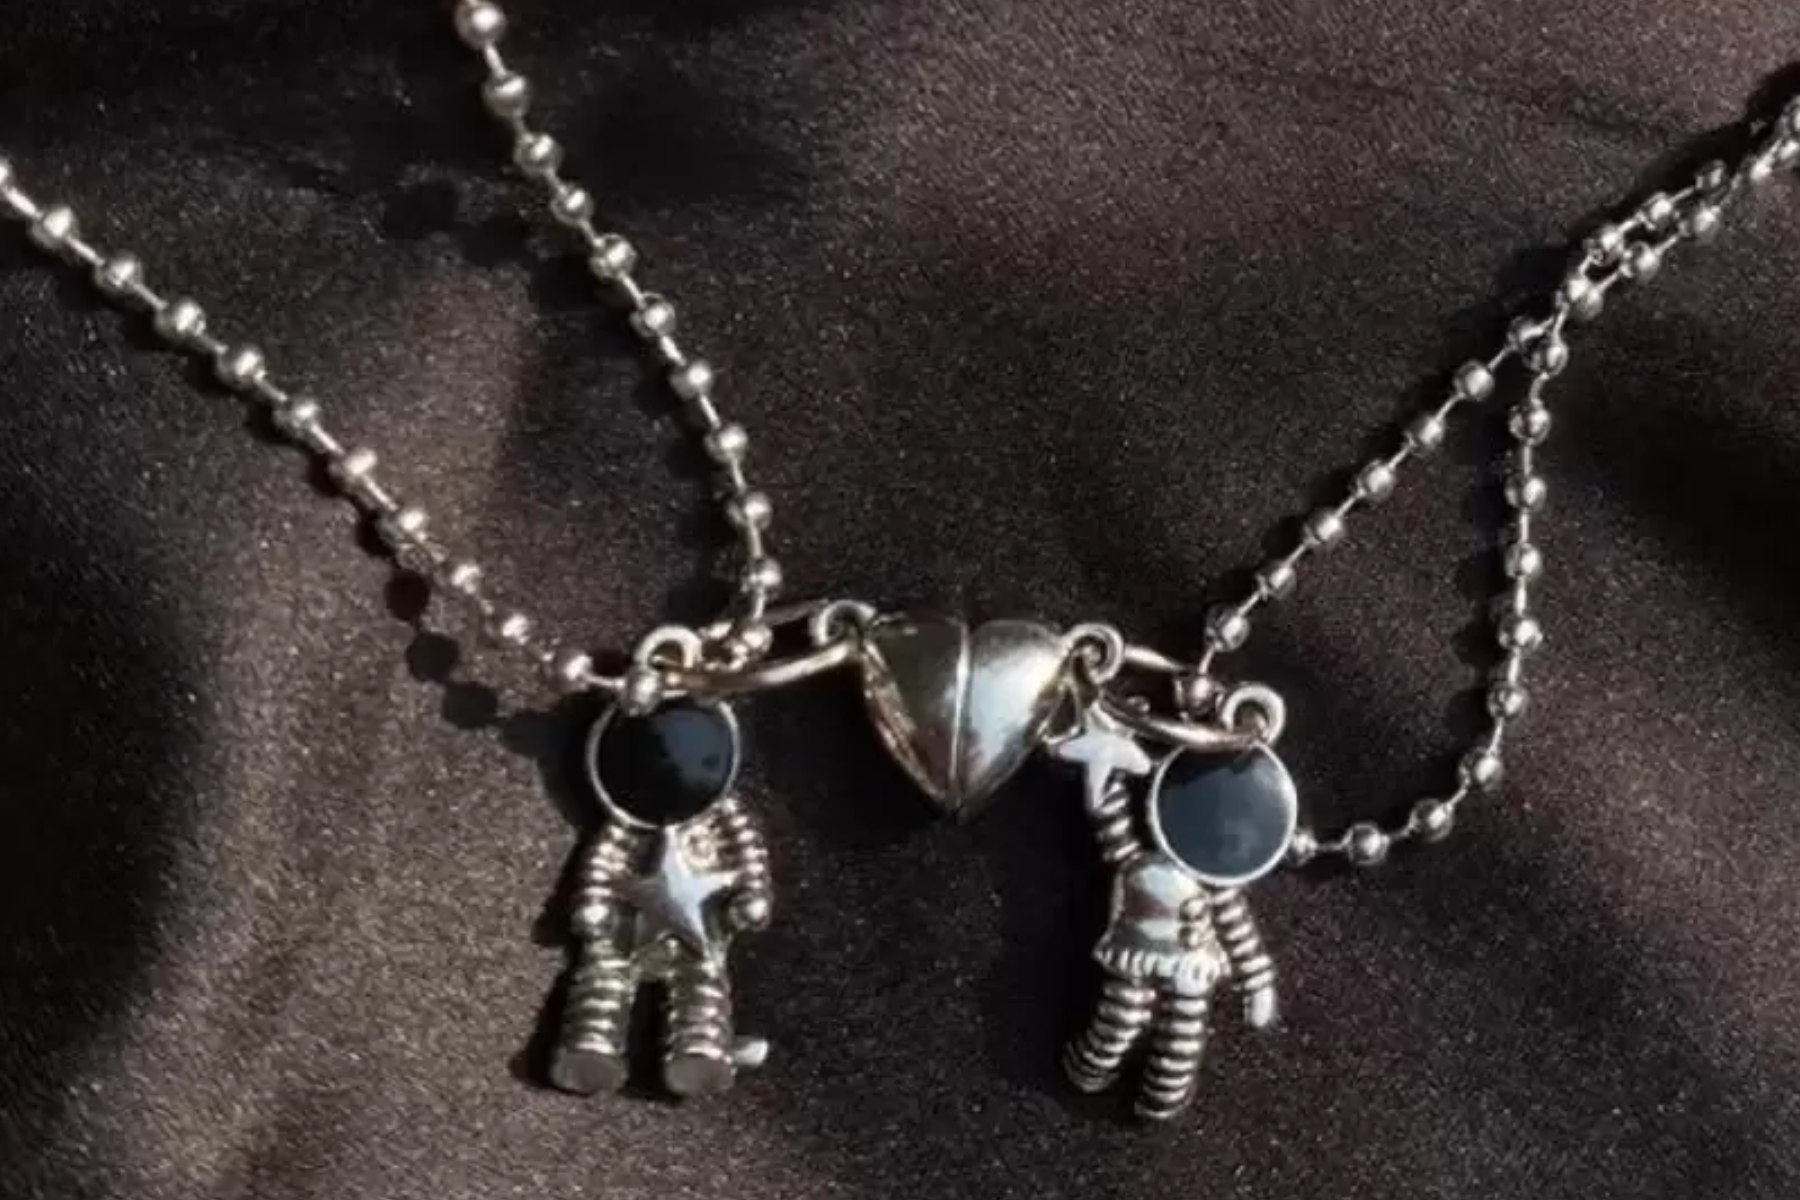 Magnetic platinum necklace with an astronaut couple design